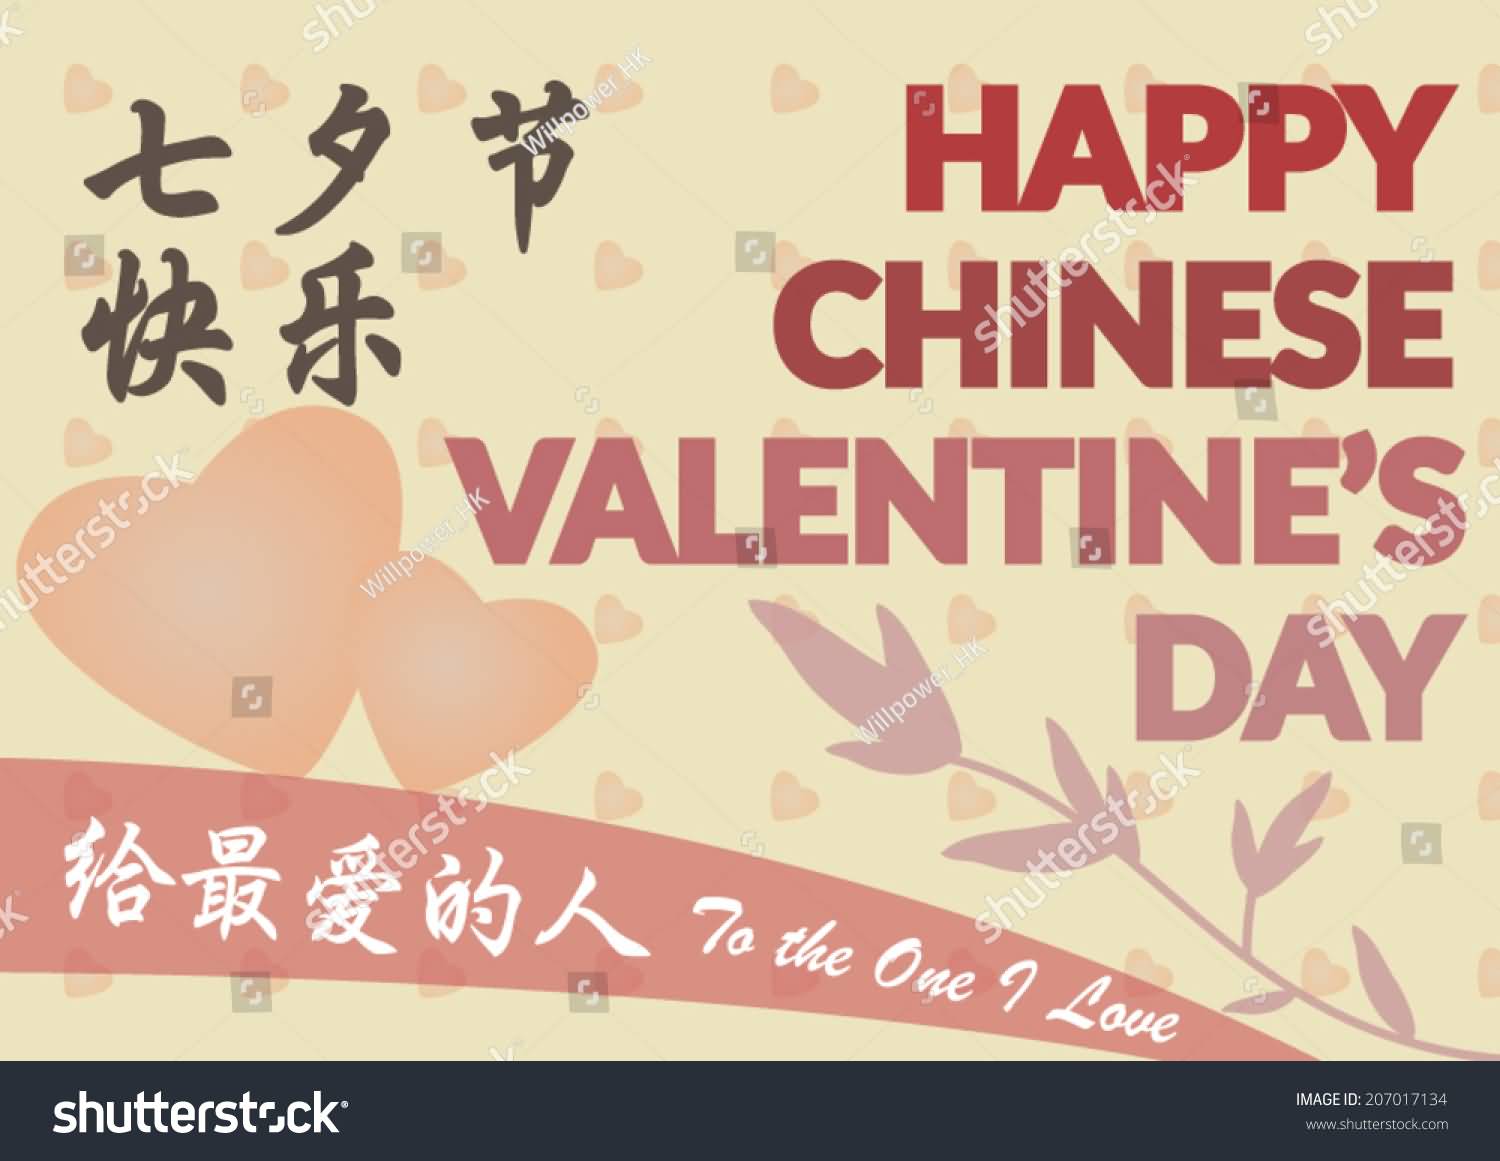 Happy Chinese Valentine’s Day Illustration Picture